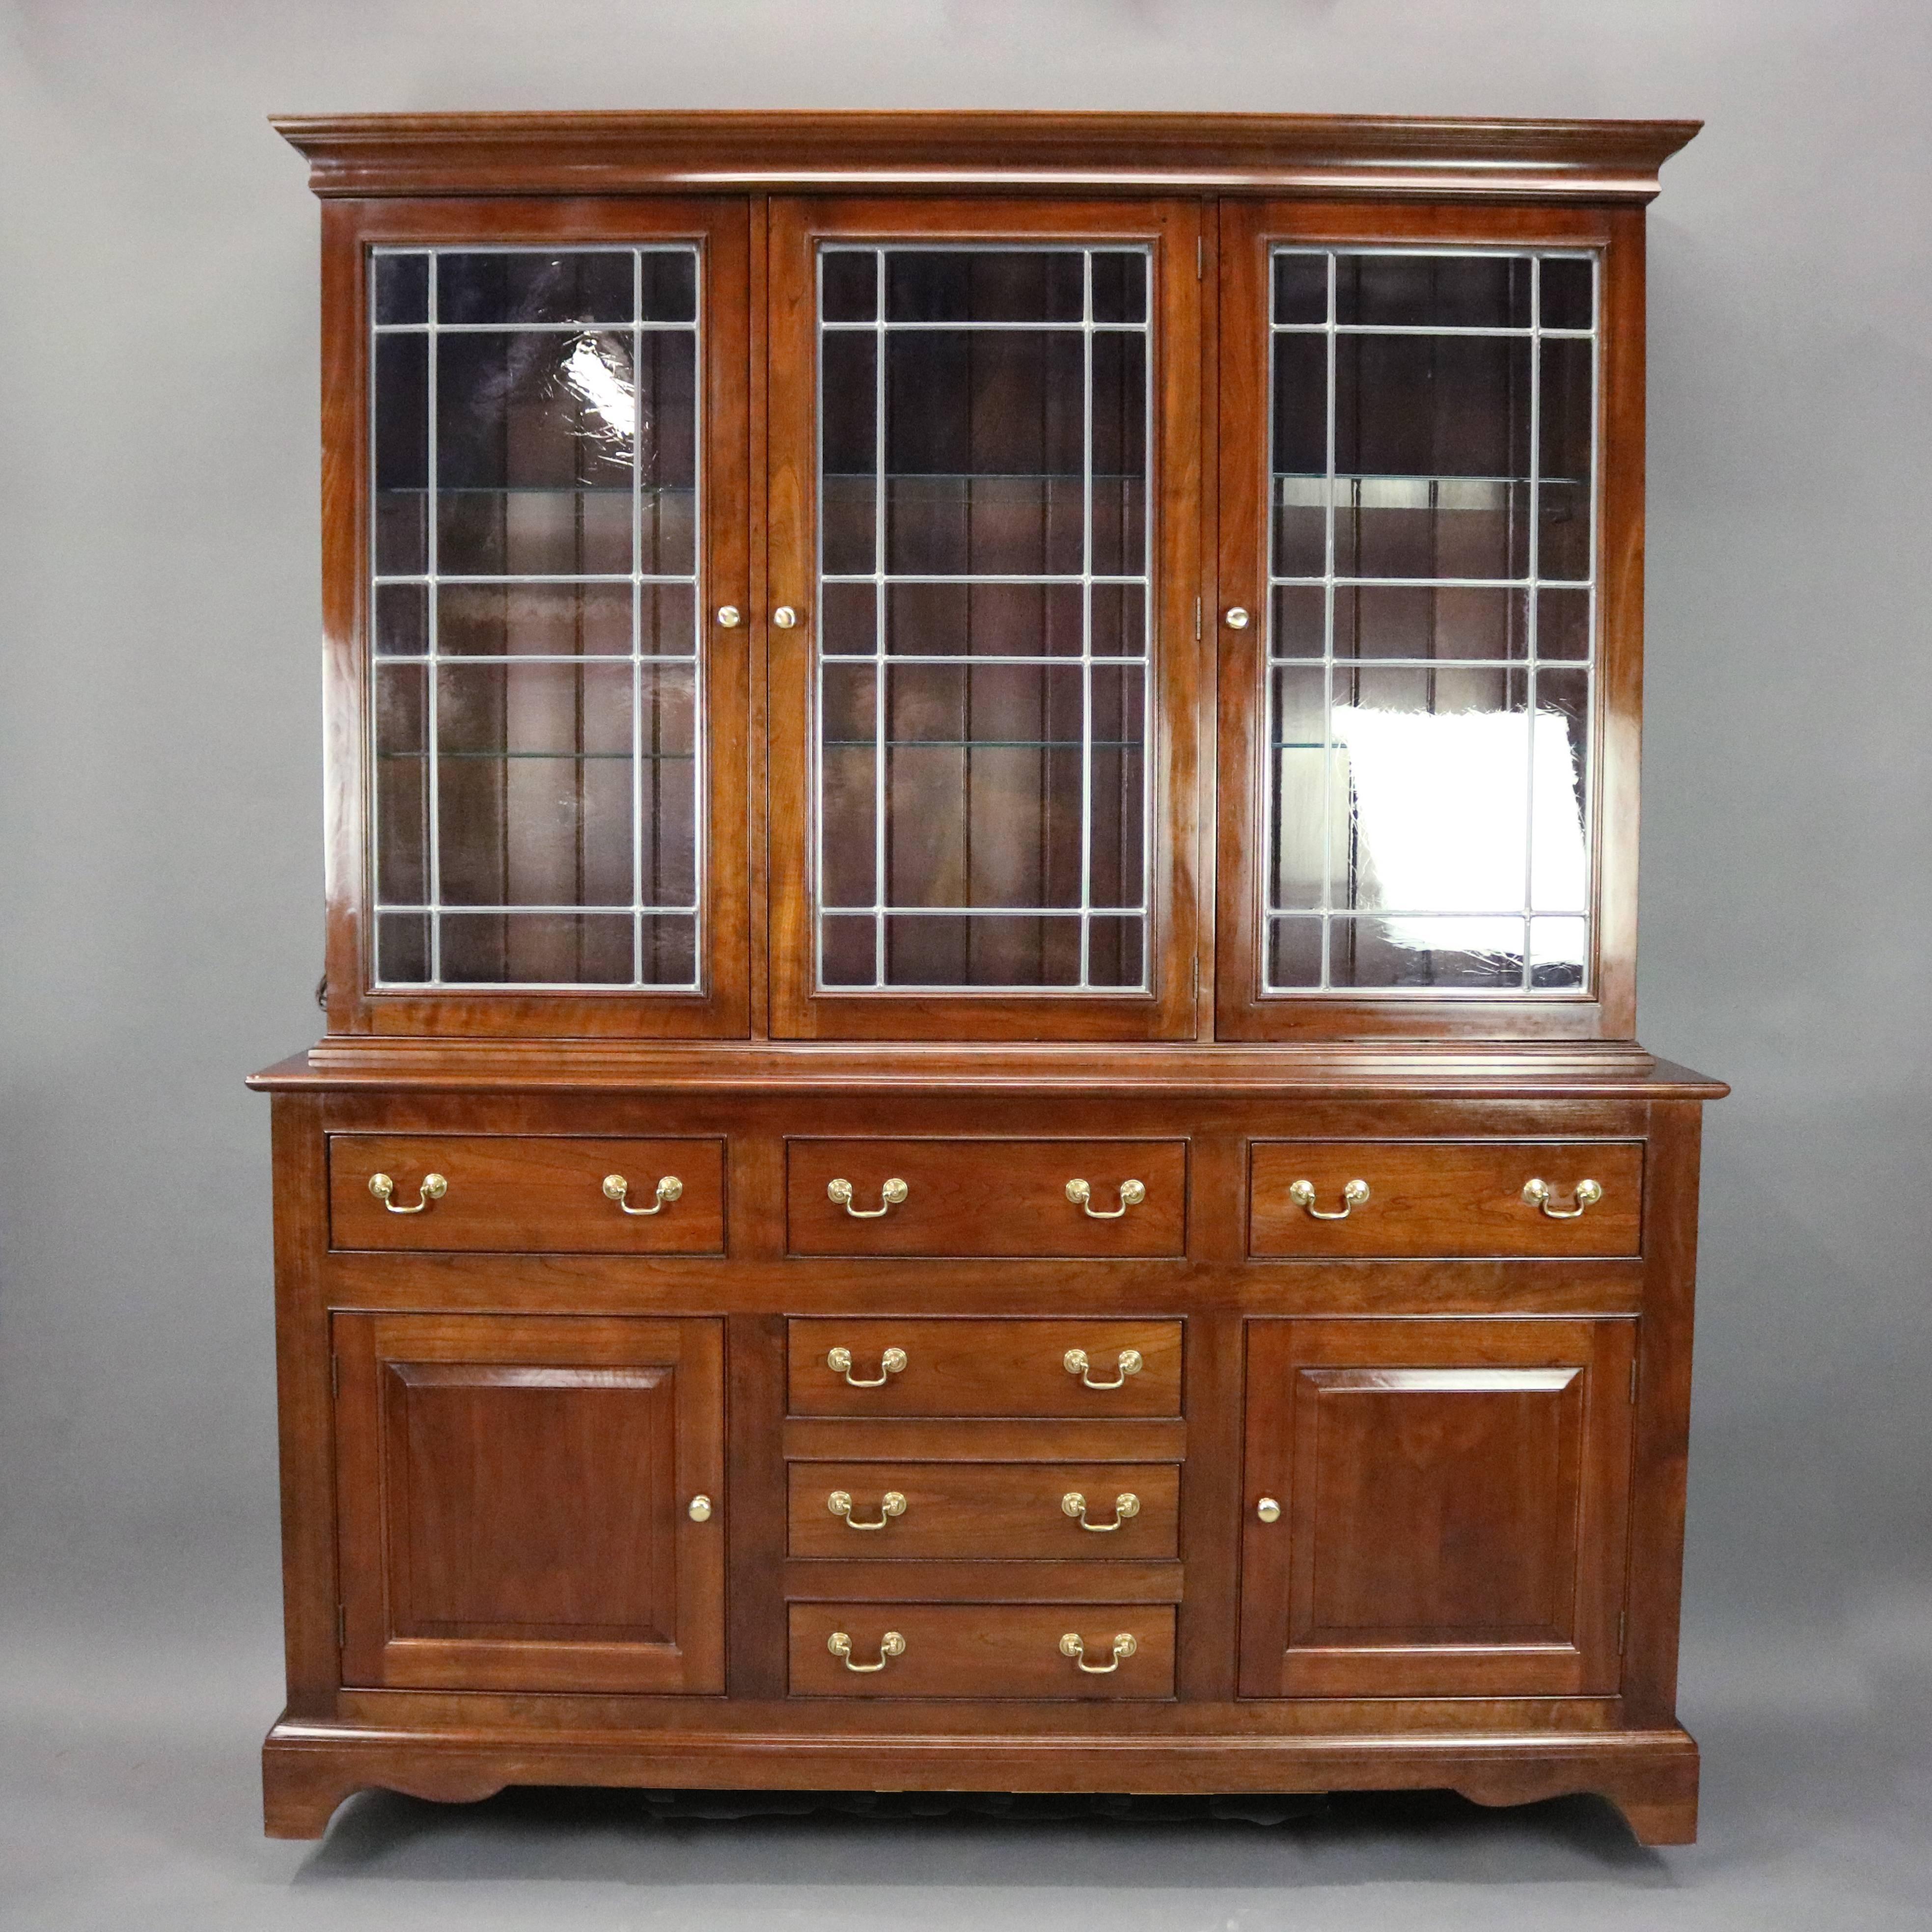 Vintage L. & J.G. Stickley Cherry Valley Collection two-piece breakfront features solid cherry construction with six drawer and two door lower cabinet below three door glass display upper, circa 1985

Measures: 81" H x 87.5" W x